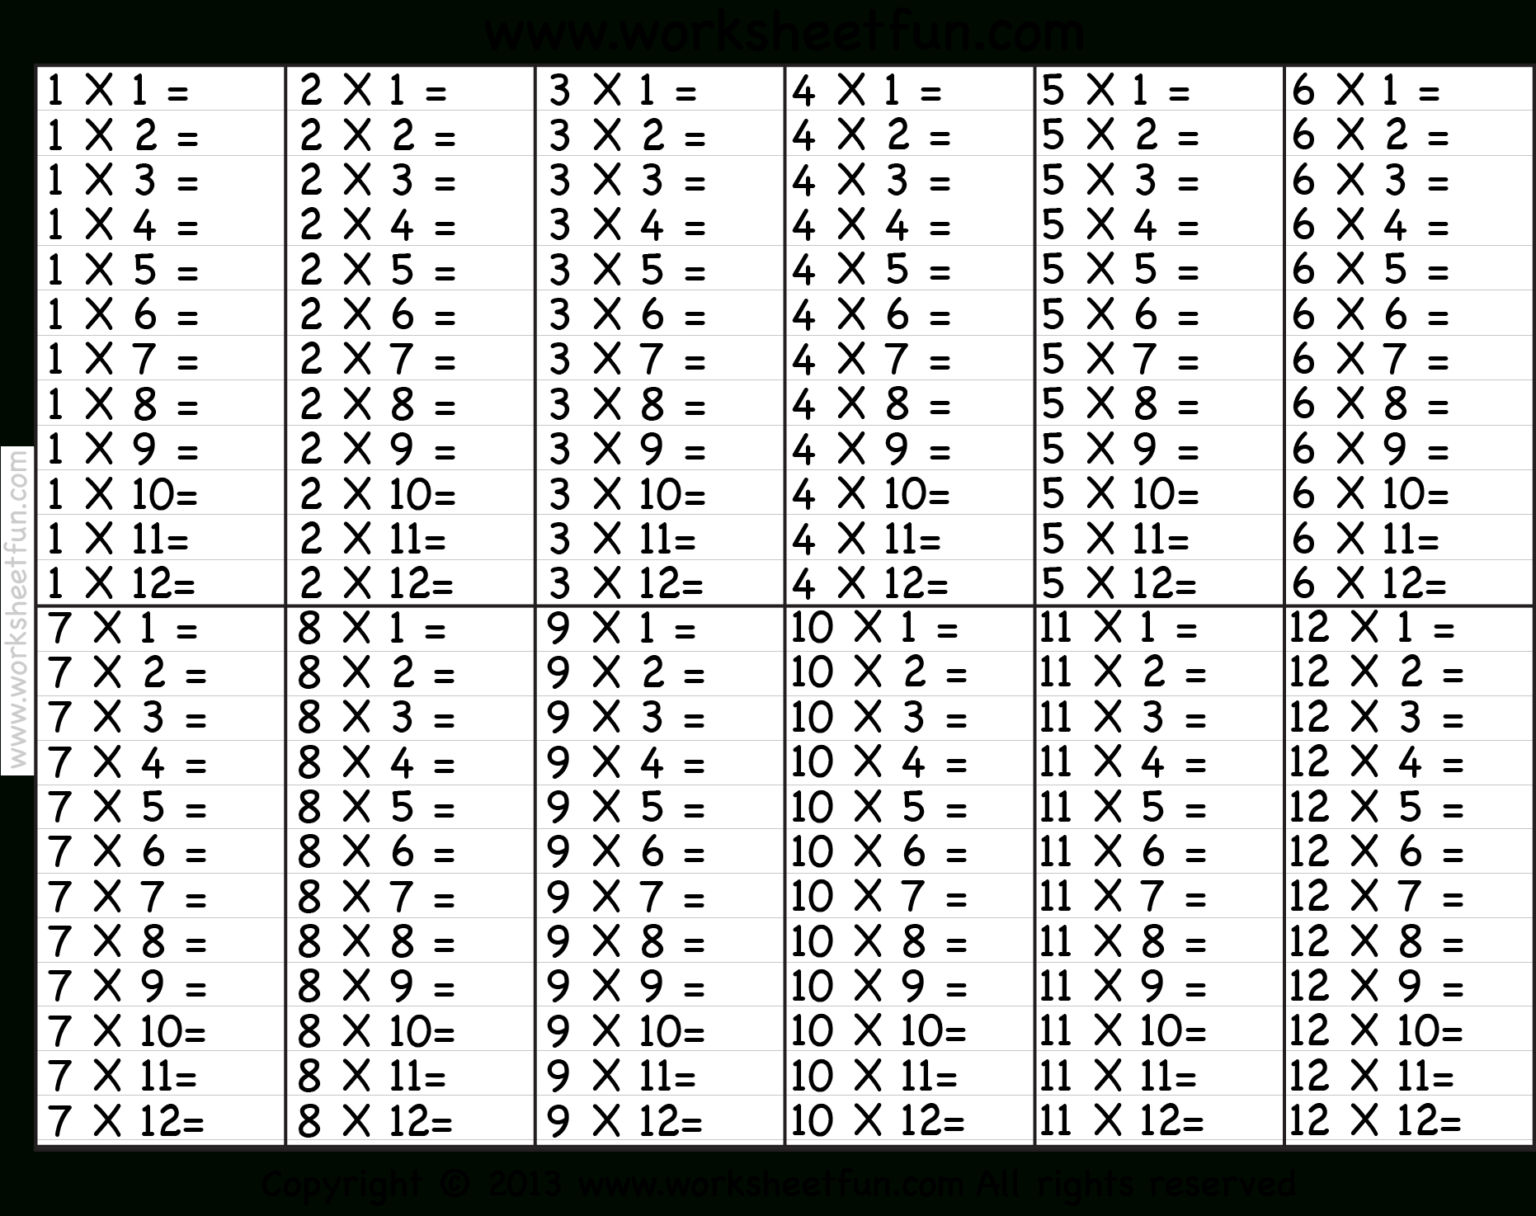 6 times table up to 1000